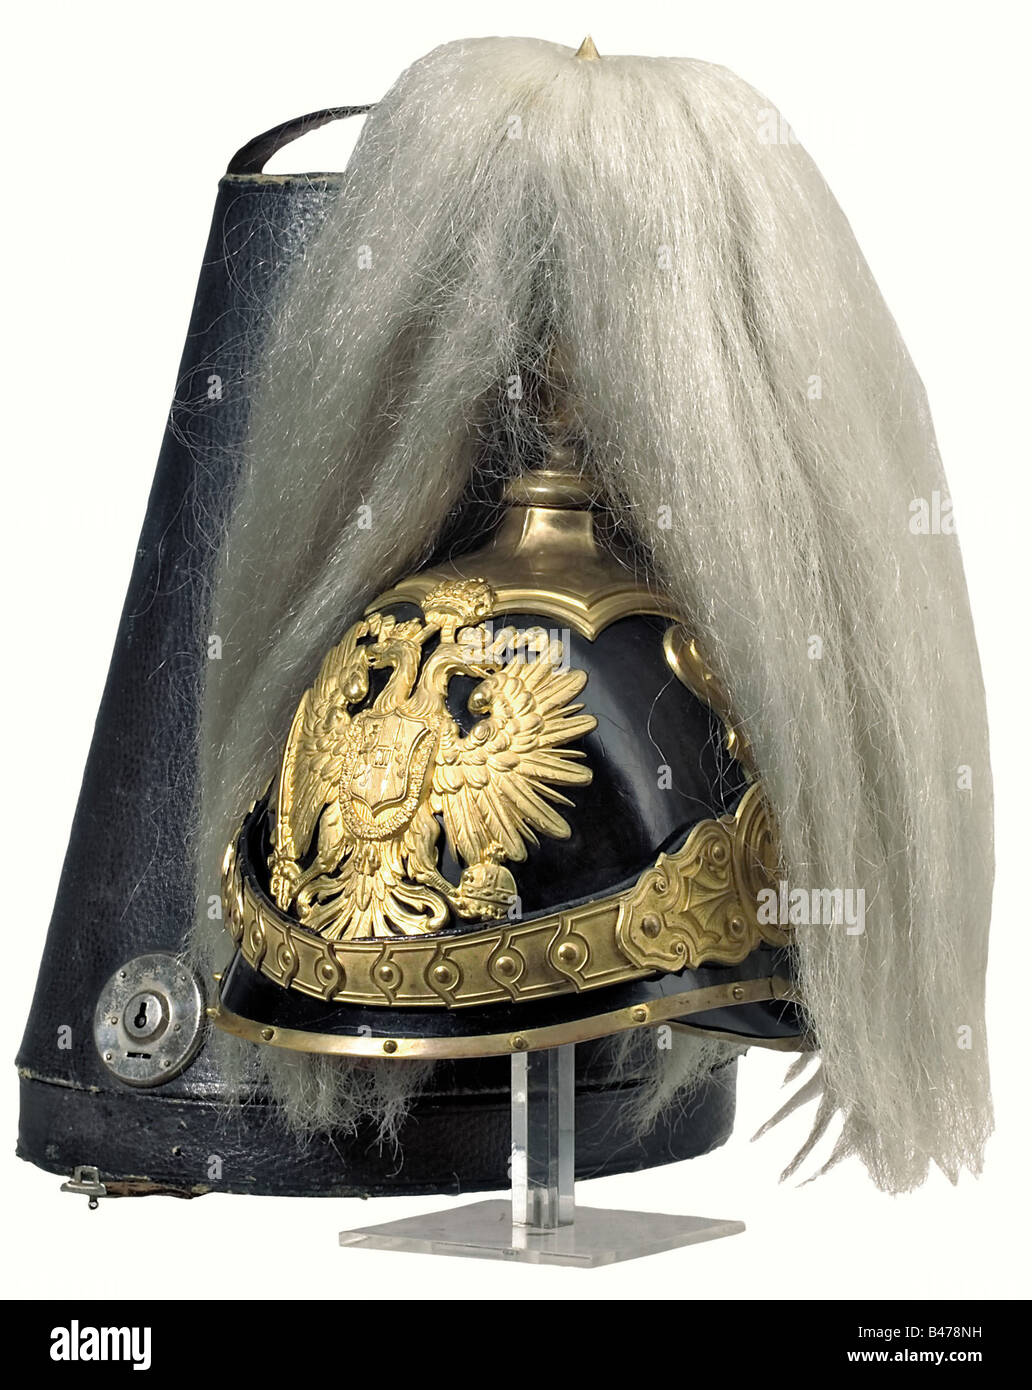 An officer's helmet of the 'Trabanten' Life Guards, according to the regulations of 1904. Tinned and black lacquered steel body. Mountings with frosted and polished gold plating. Leather sweatband, interior silk lining, complete with white buffalo hair crest. It comes with a black leather hat box with chamois tanned leather lining. Extremely rare and desirable helmet in outstanding condition. historic, historical, 1900s, 20th century, Imperial, Austria, Austrian, Danube Monarchy, Empire, object, objects, stills, clipping, clippings, cut out, cut-out, cut-outs, , Stock Photo